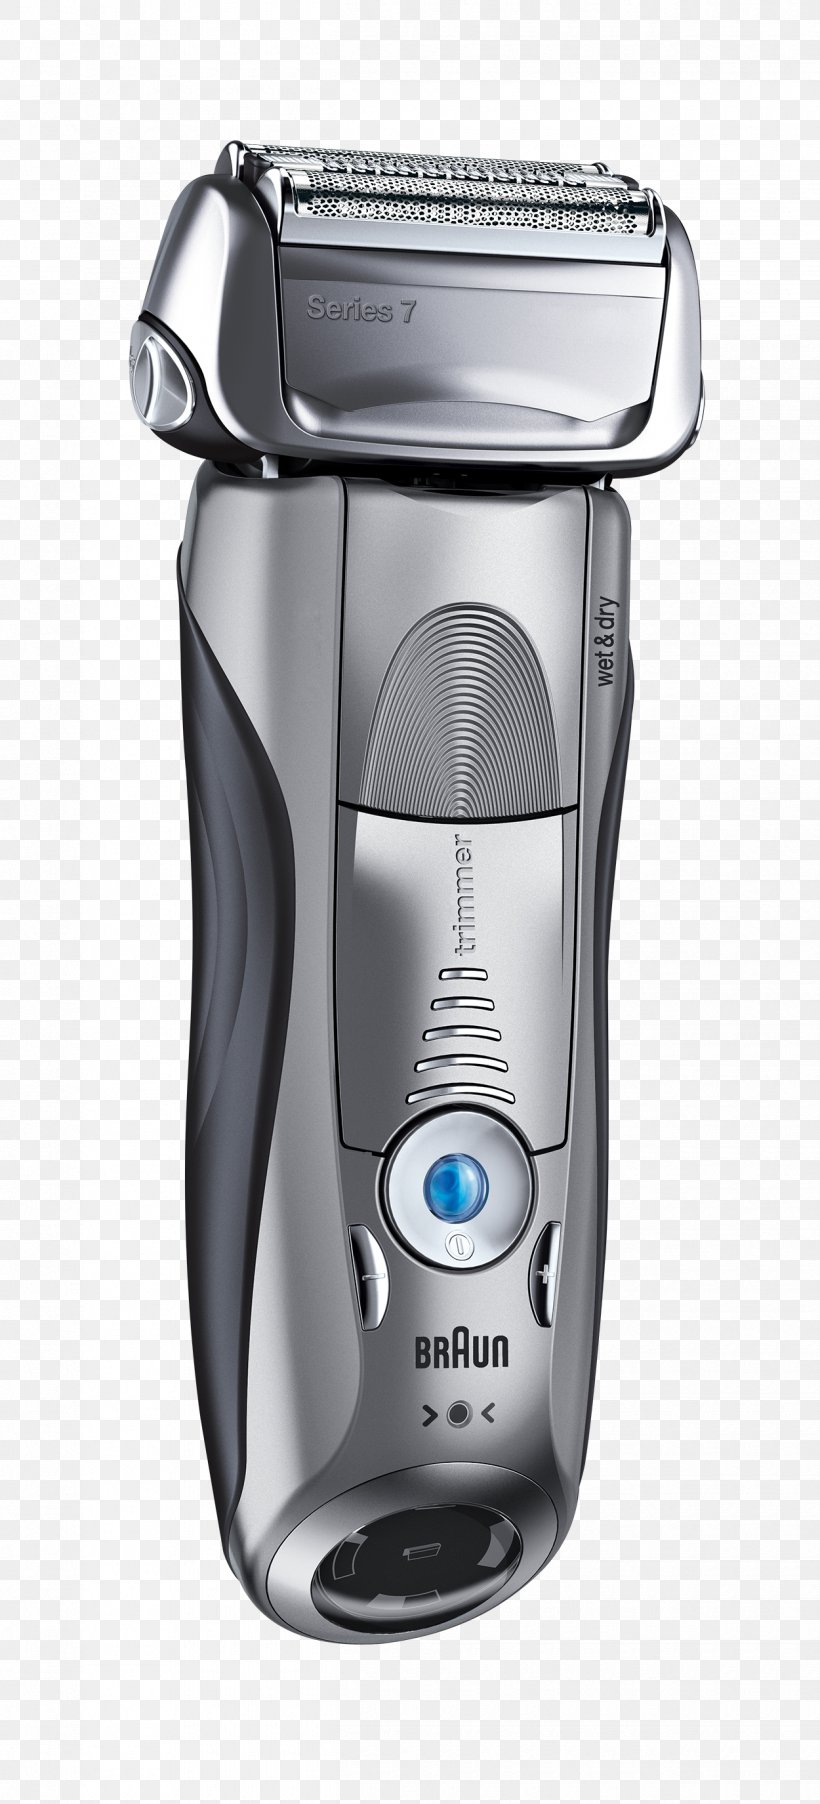 Series Hardware/Electronic Electric Razors & Hair Trimmers Braun 720s-6 7